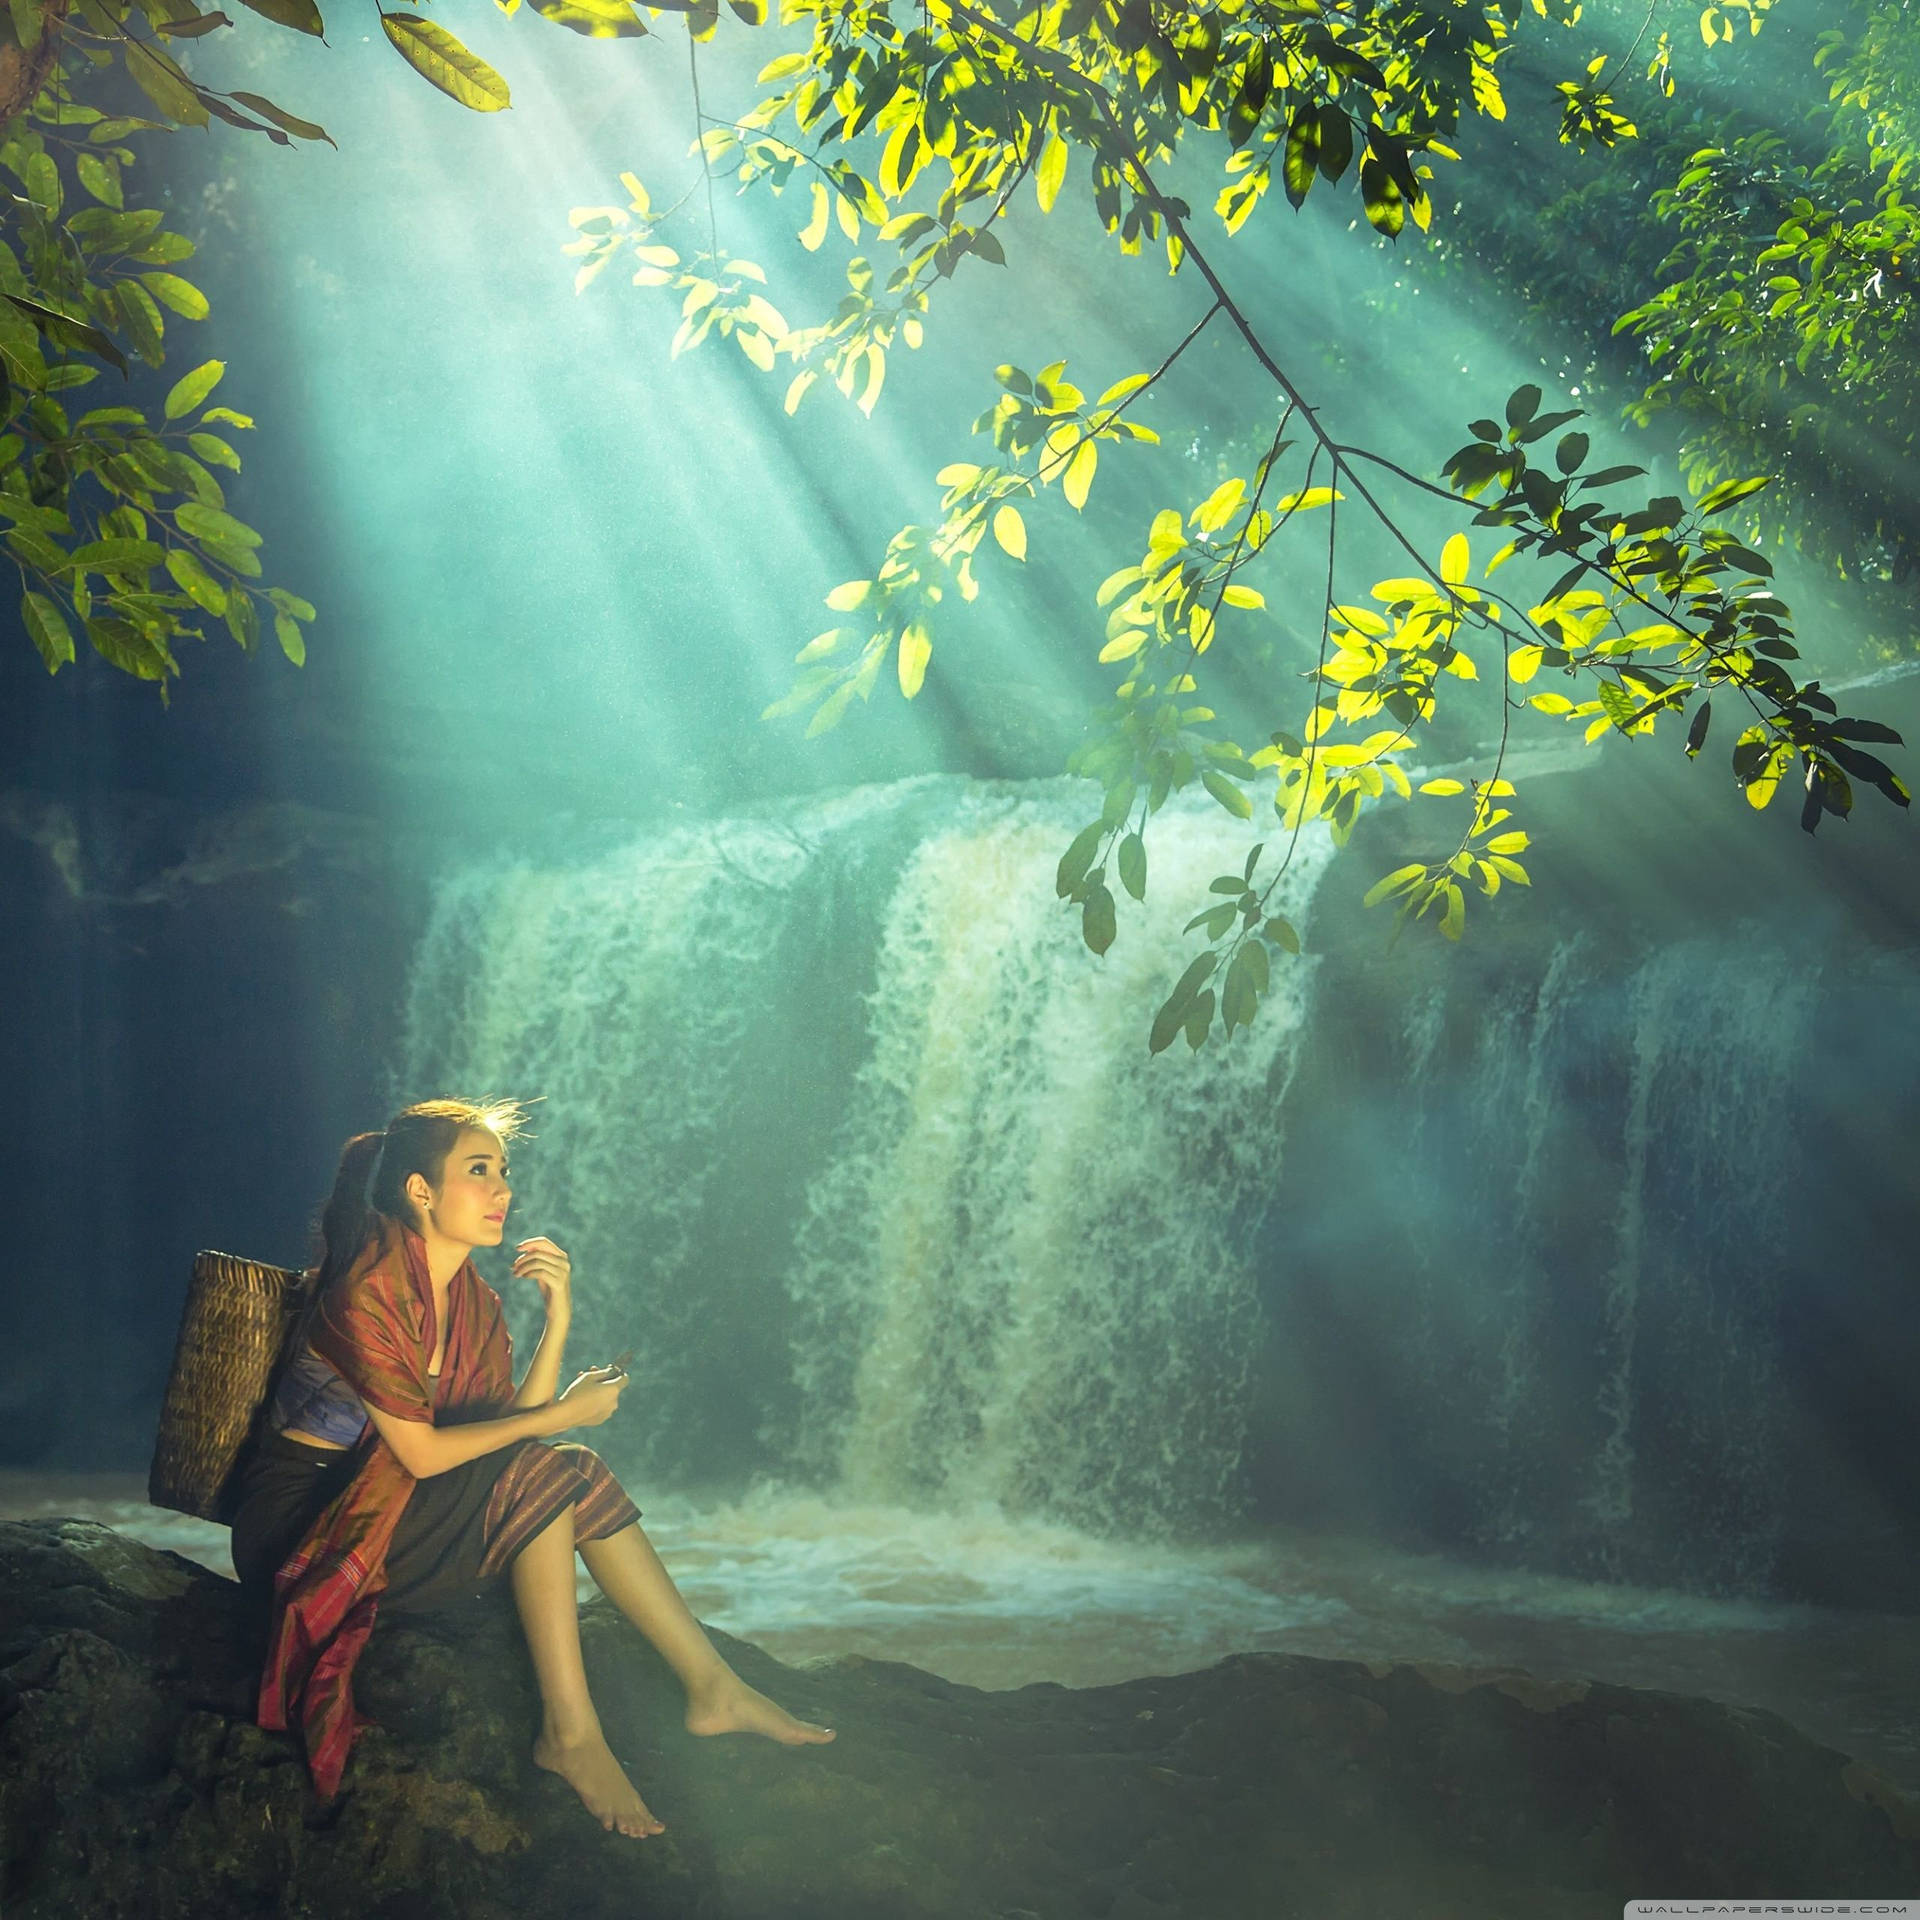 Capturing the beautiful moments near a peaceful waterfall. Wallpaper